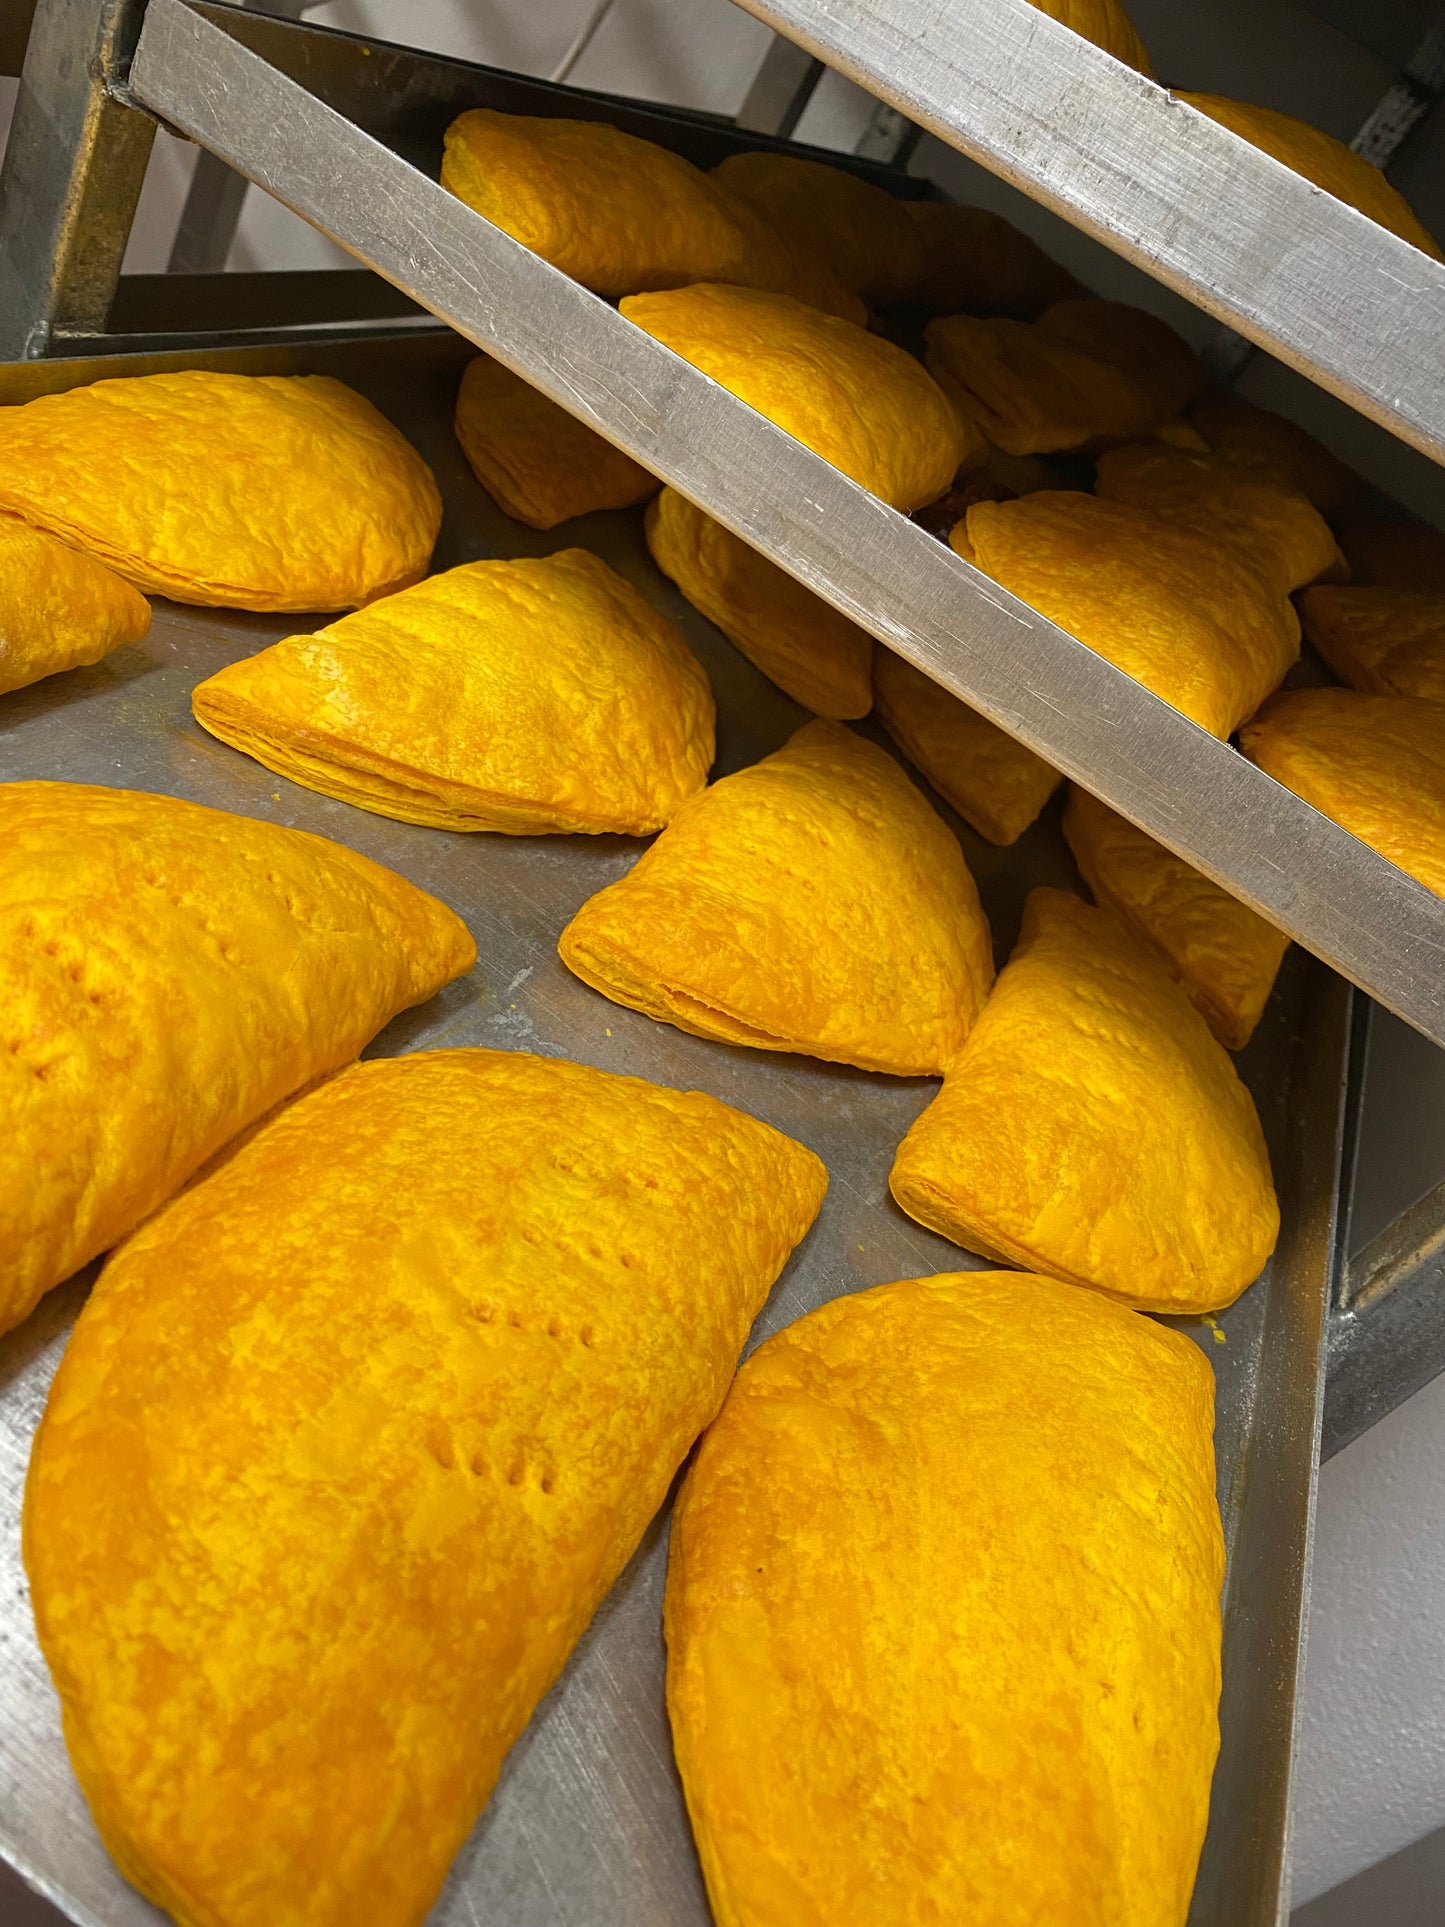 With delivery Mixed Sample Box Jamaican Patties